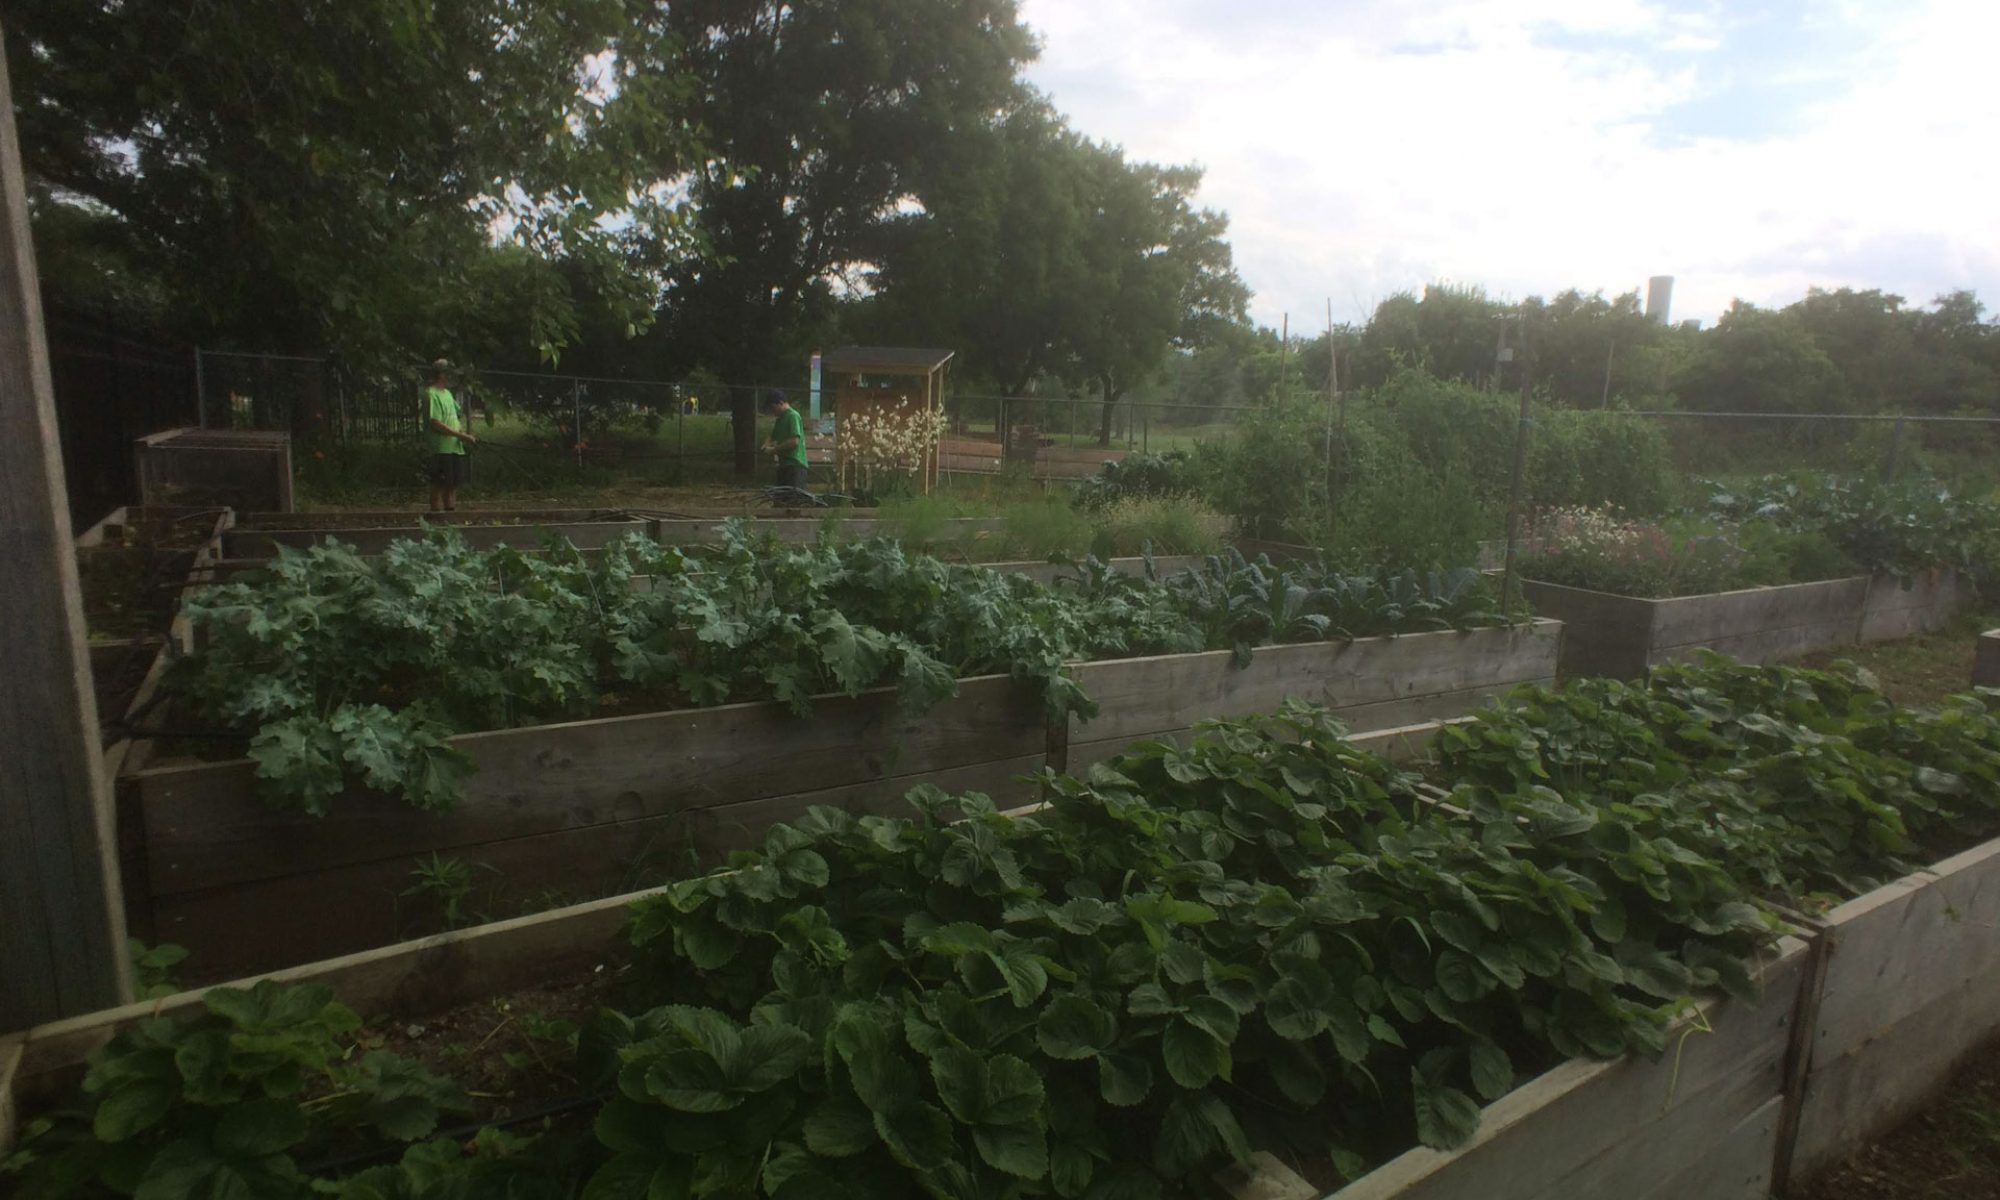 Urban Agriculture & Food Systems Convening: